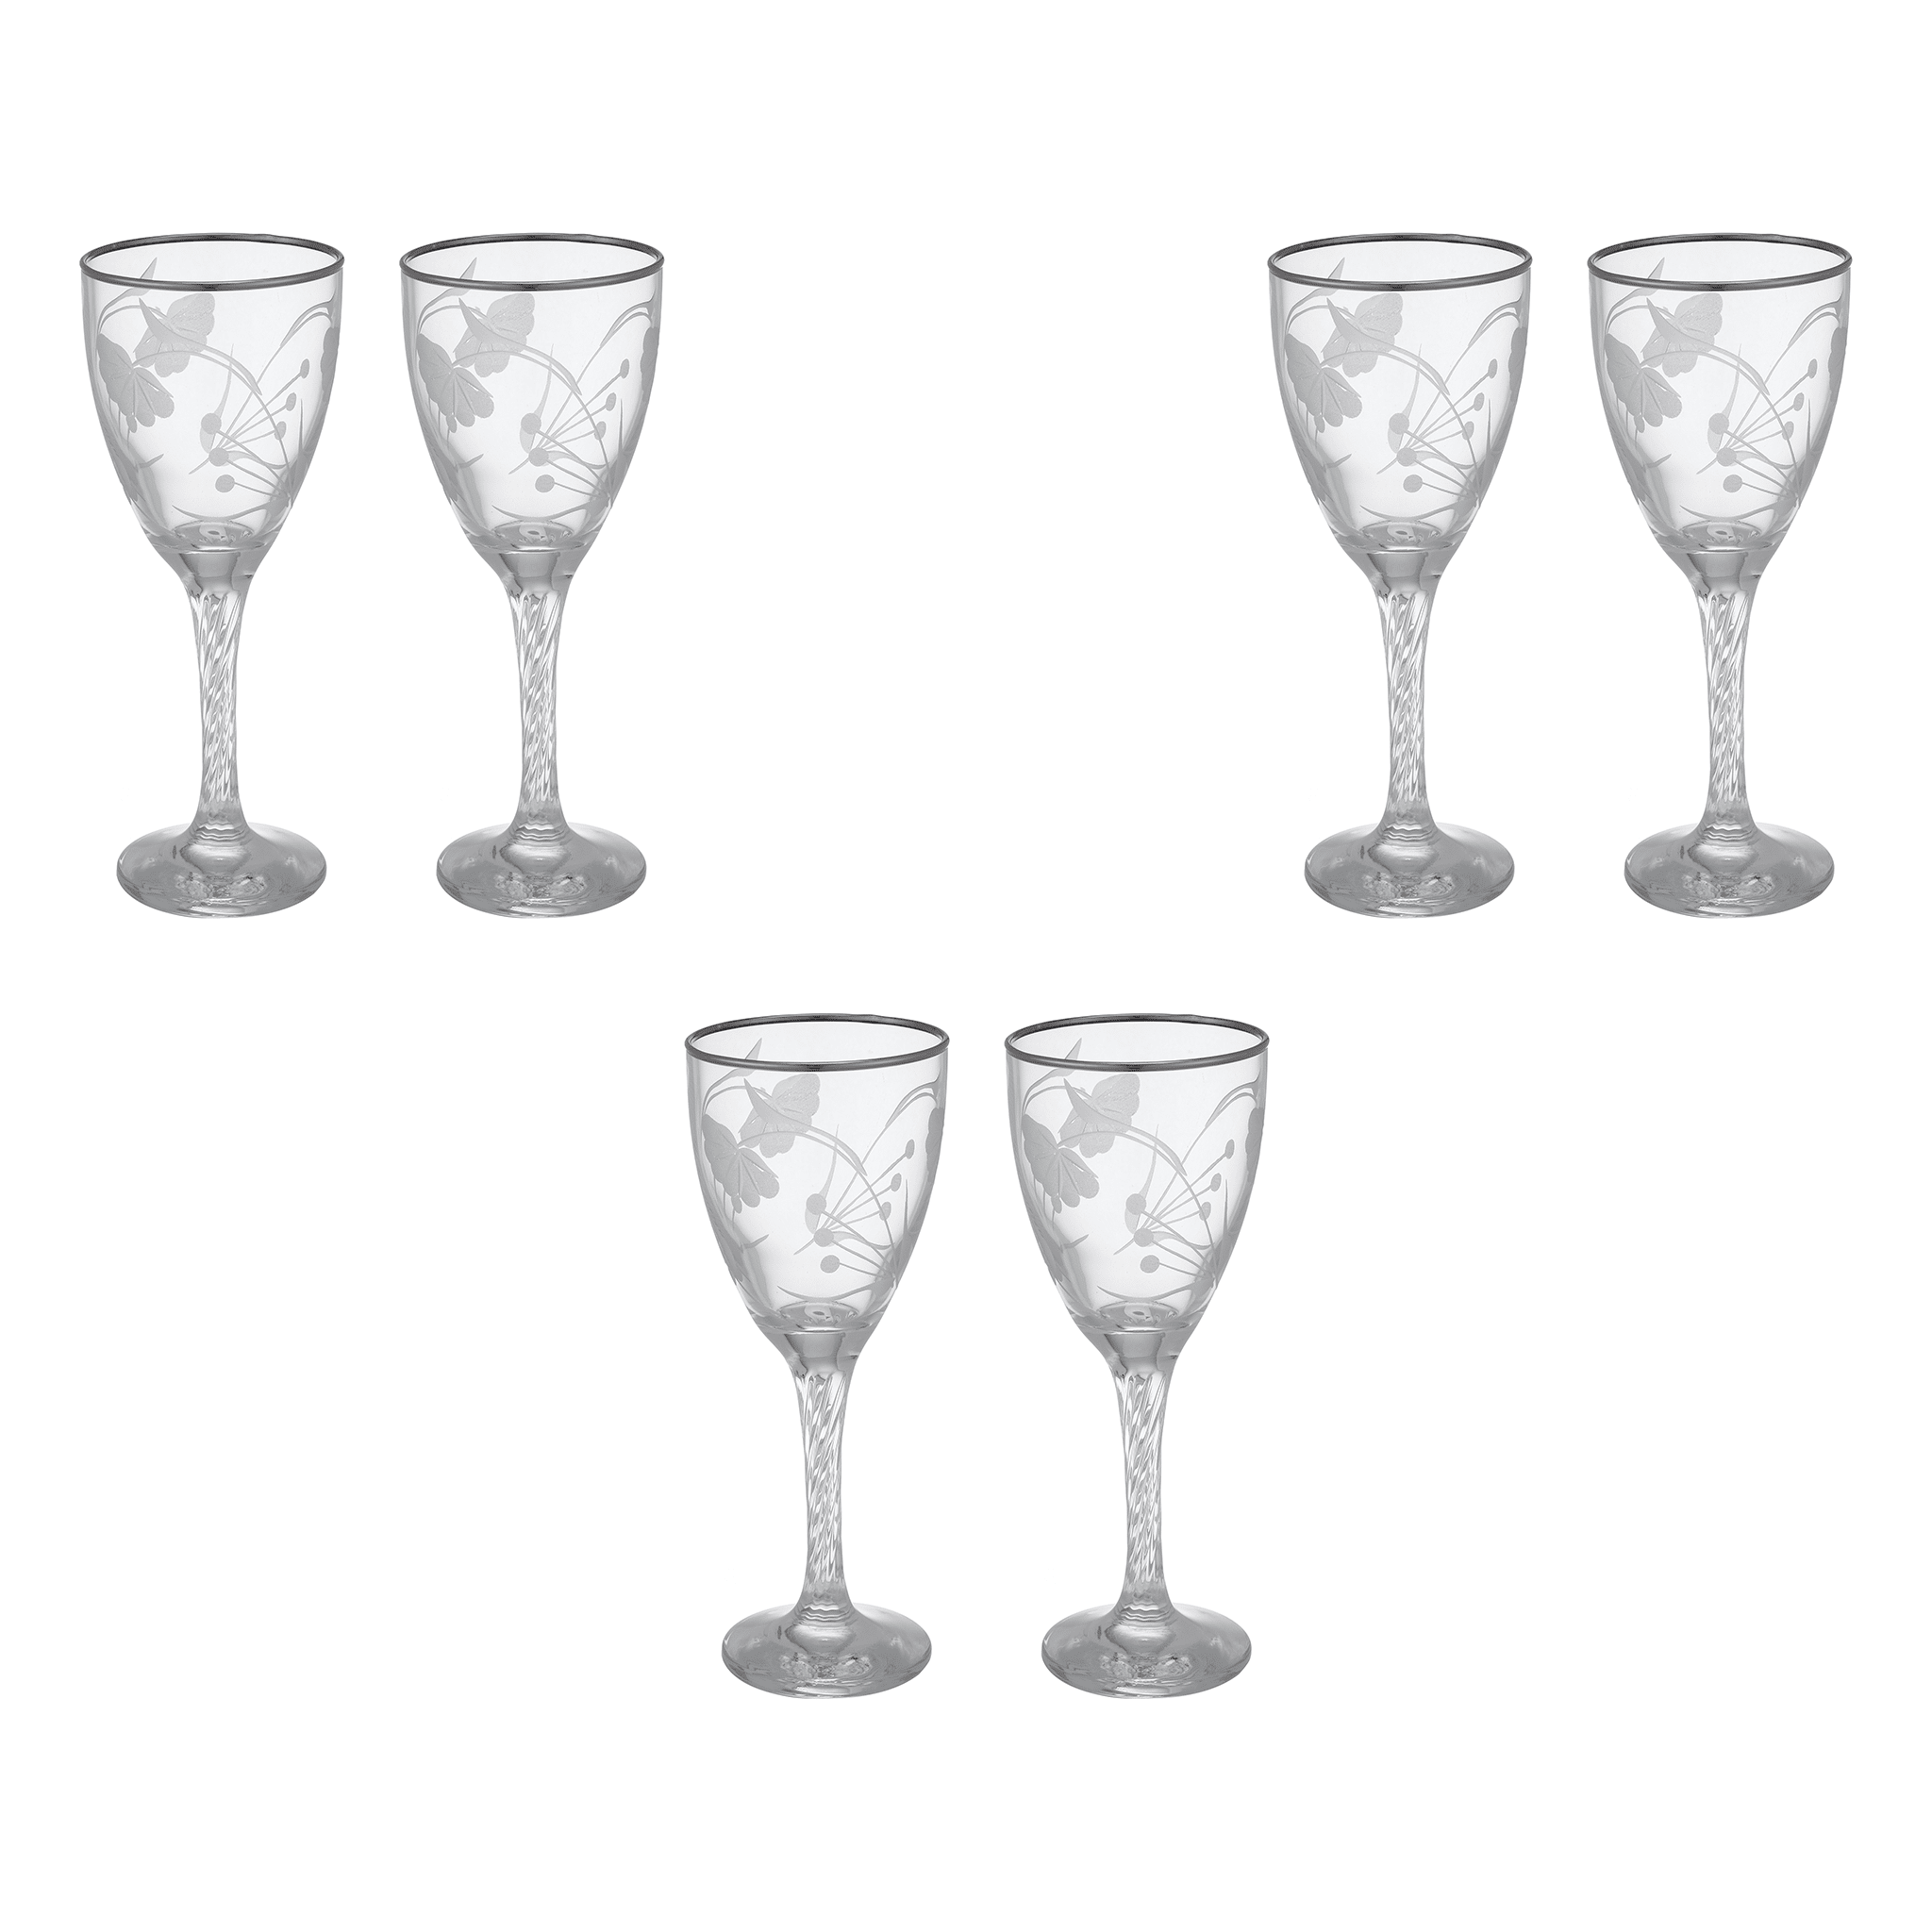 Pasabahce - Decorated Goblet Glass Set 6 Pieces - Silver - 205ml - Glass - 390005049